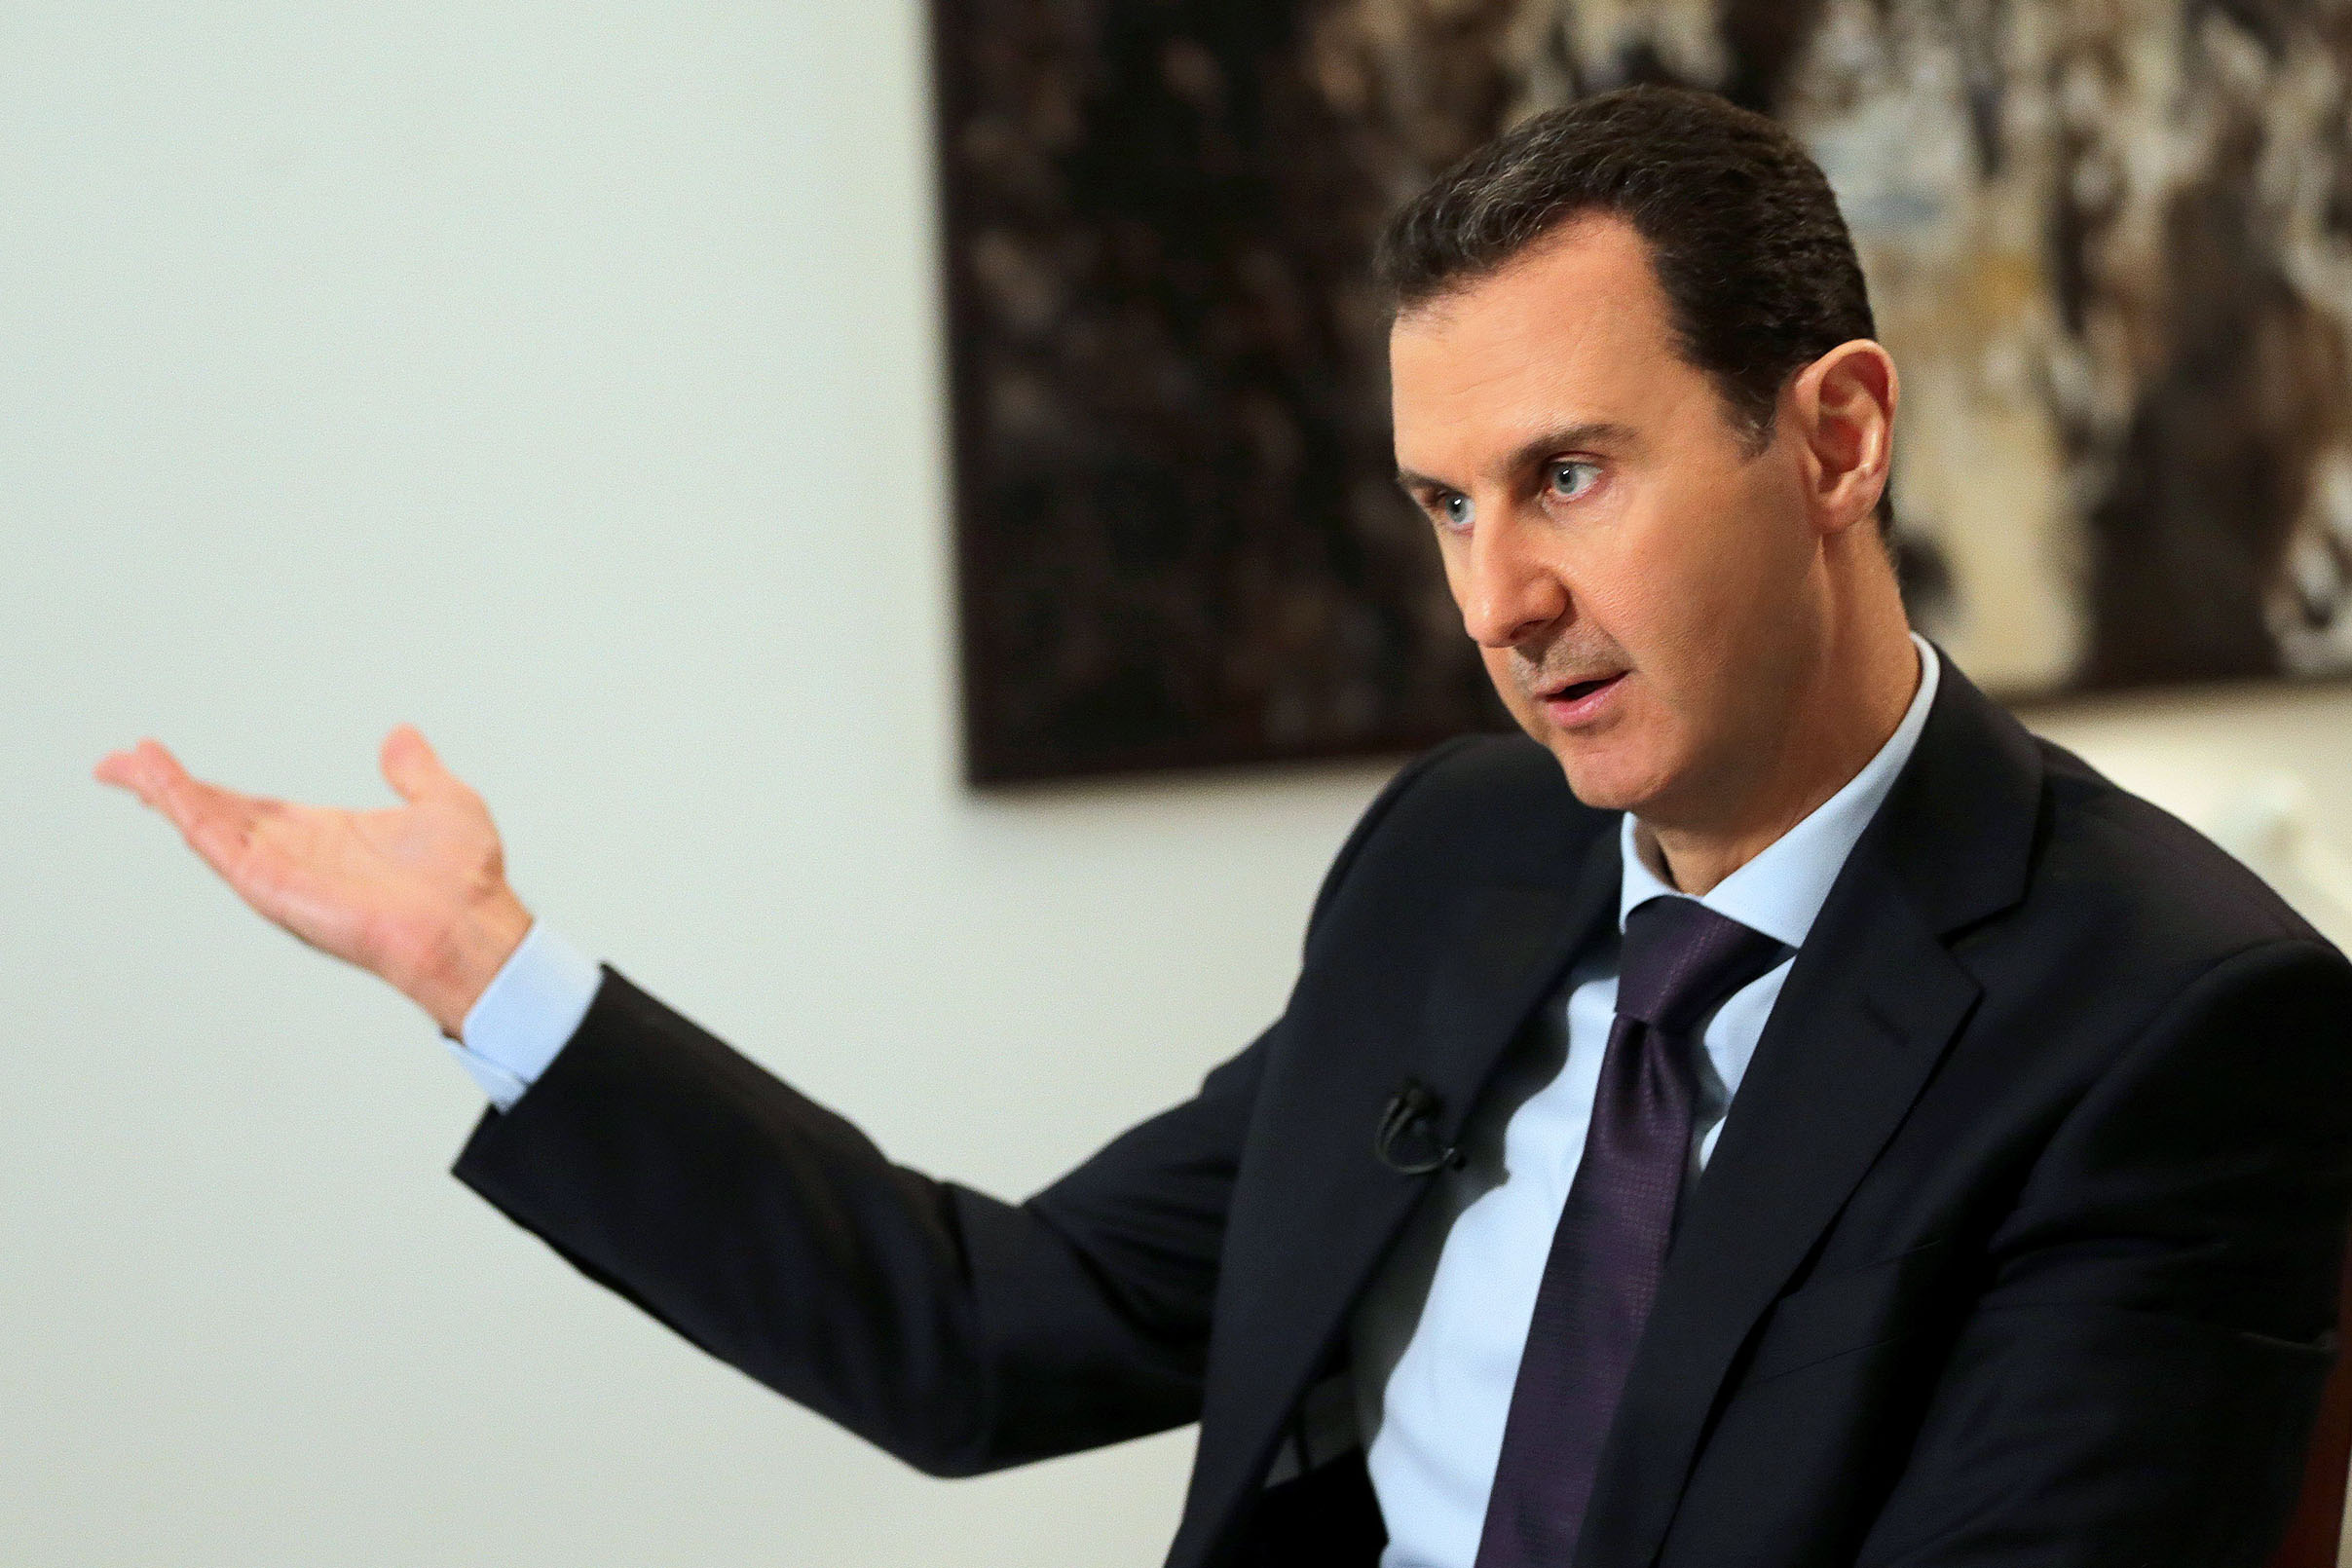 Syrian President Bashar al-Assad speaks during an interview in Damascus, Syria, in February 2016. Credit: Joseph Eid/AFP via Getty Images